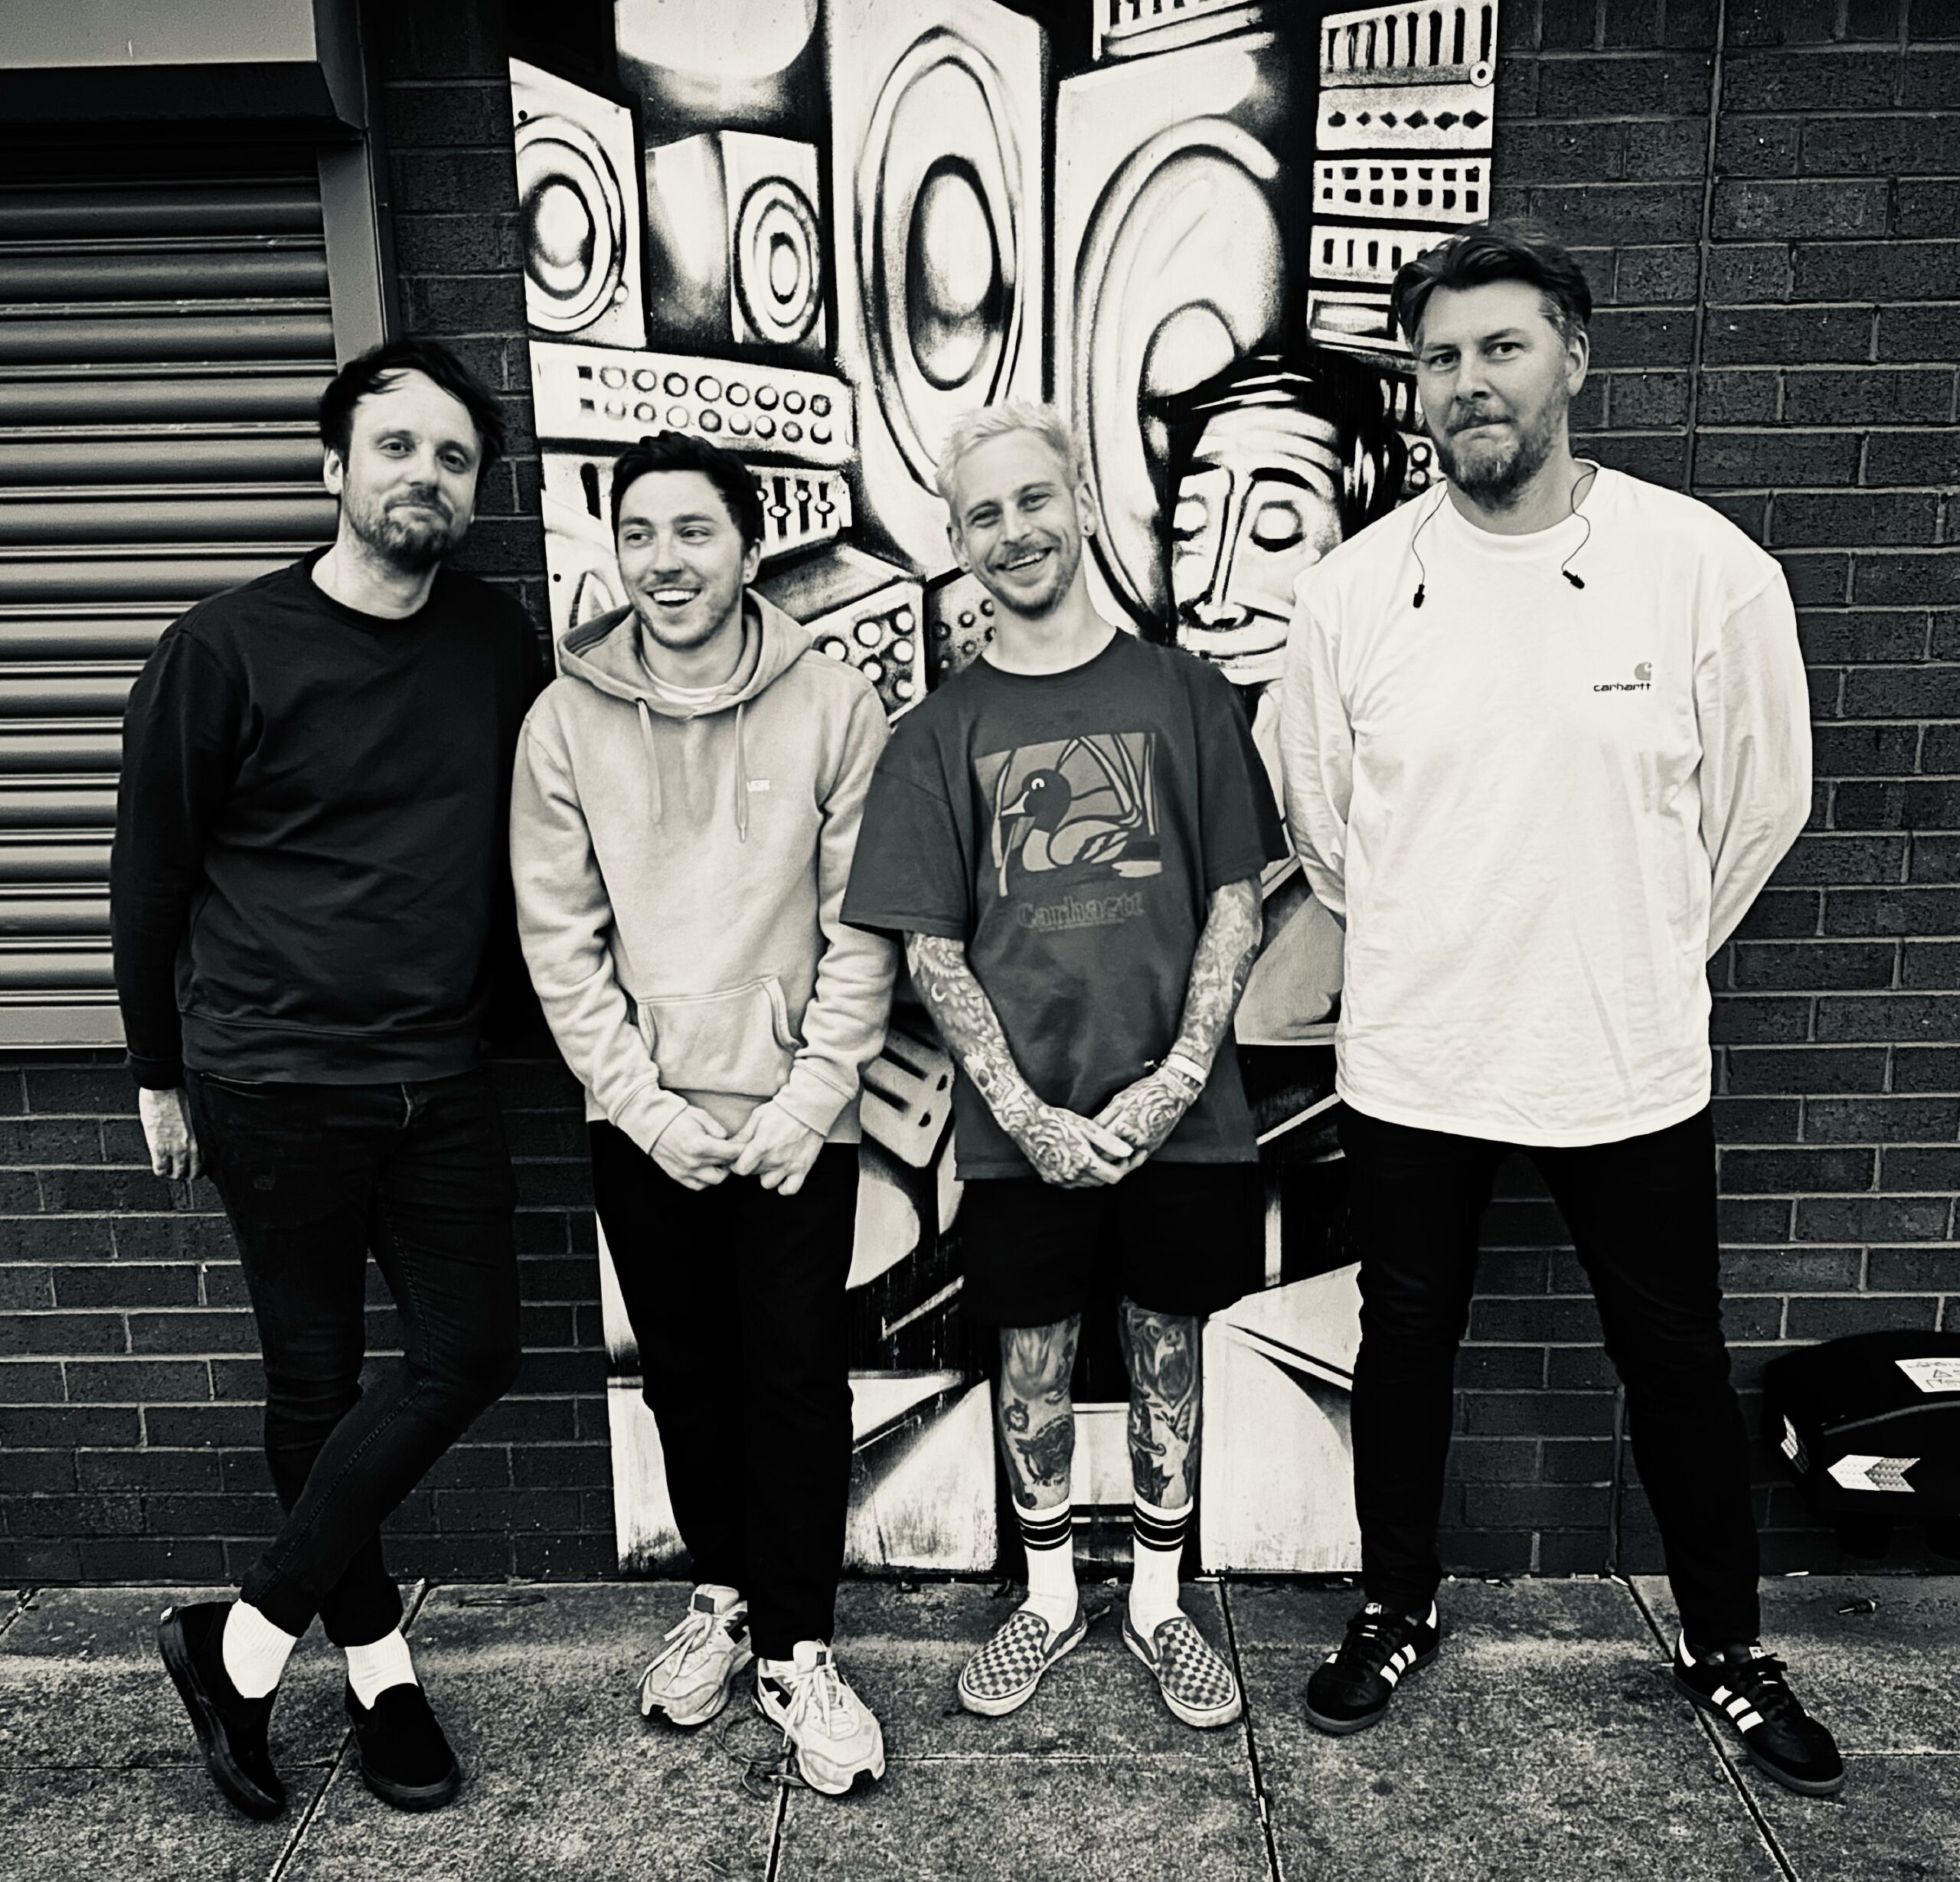 Black and white image of four males standing in front of a mural.